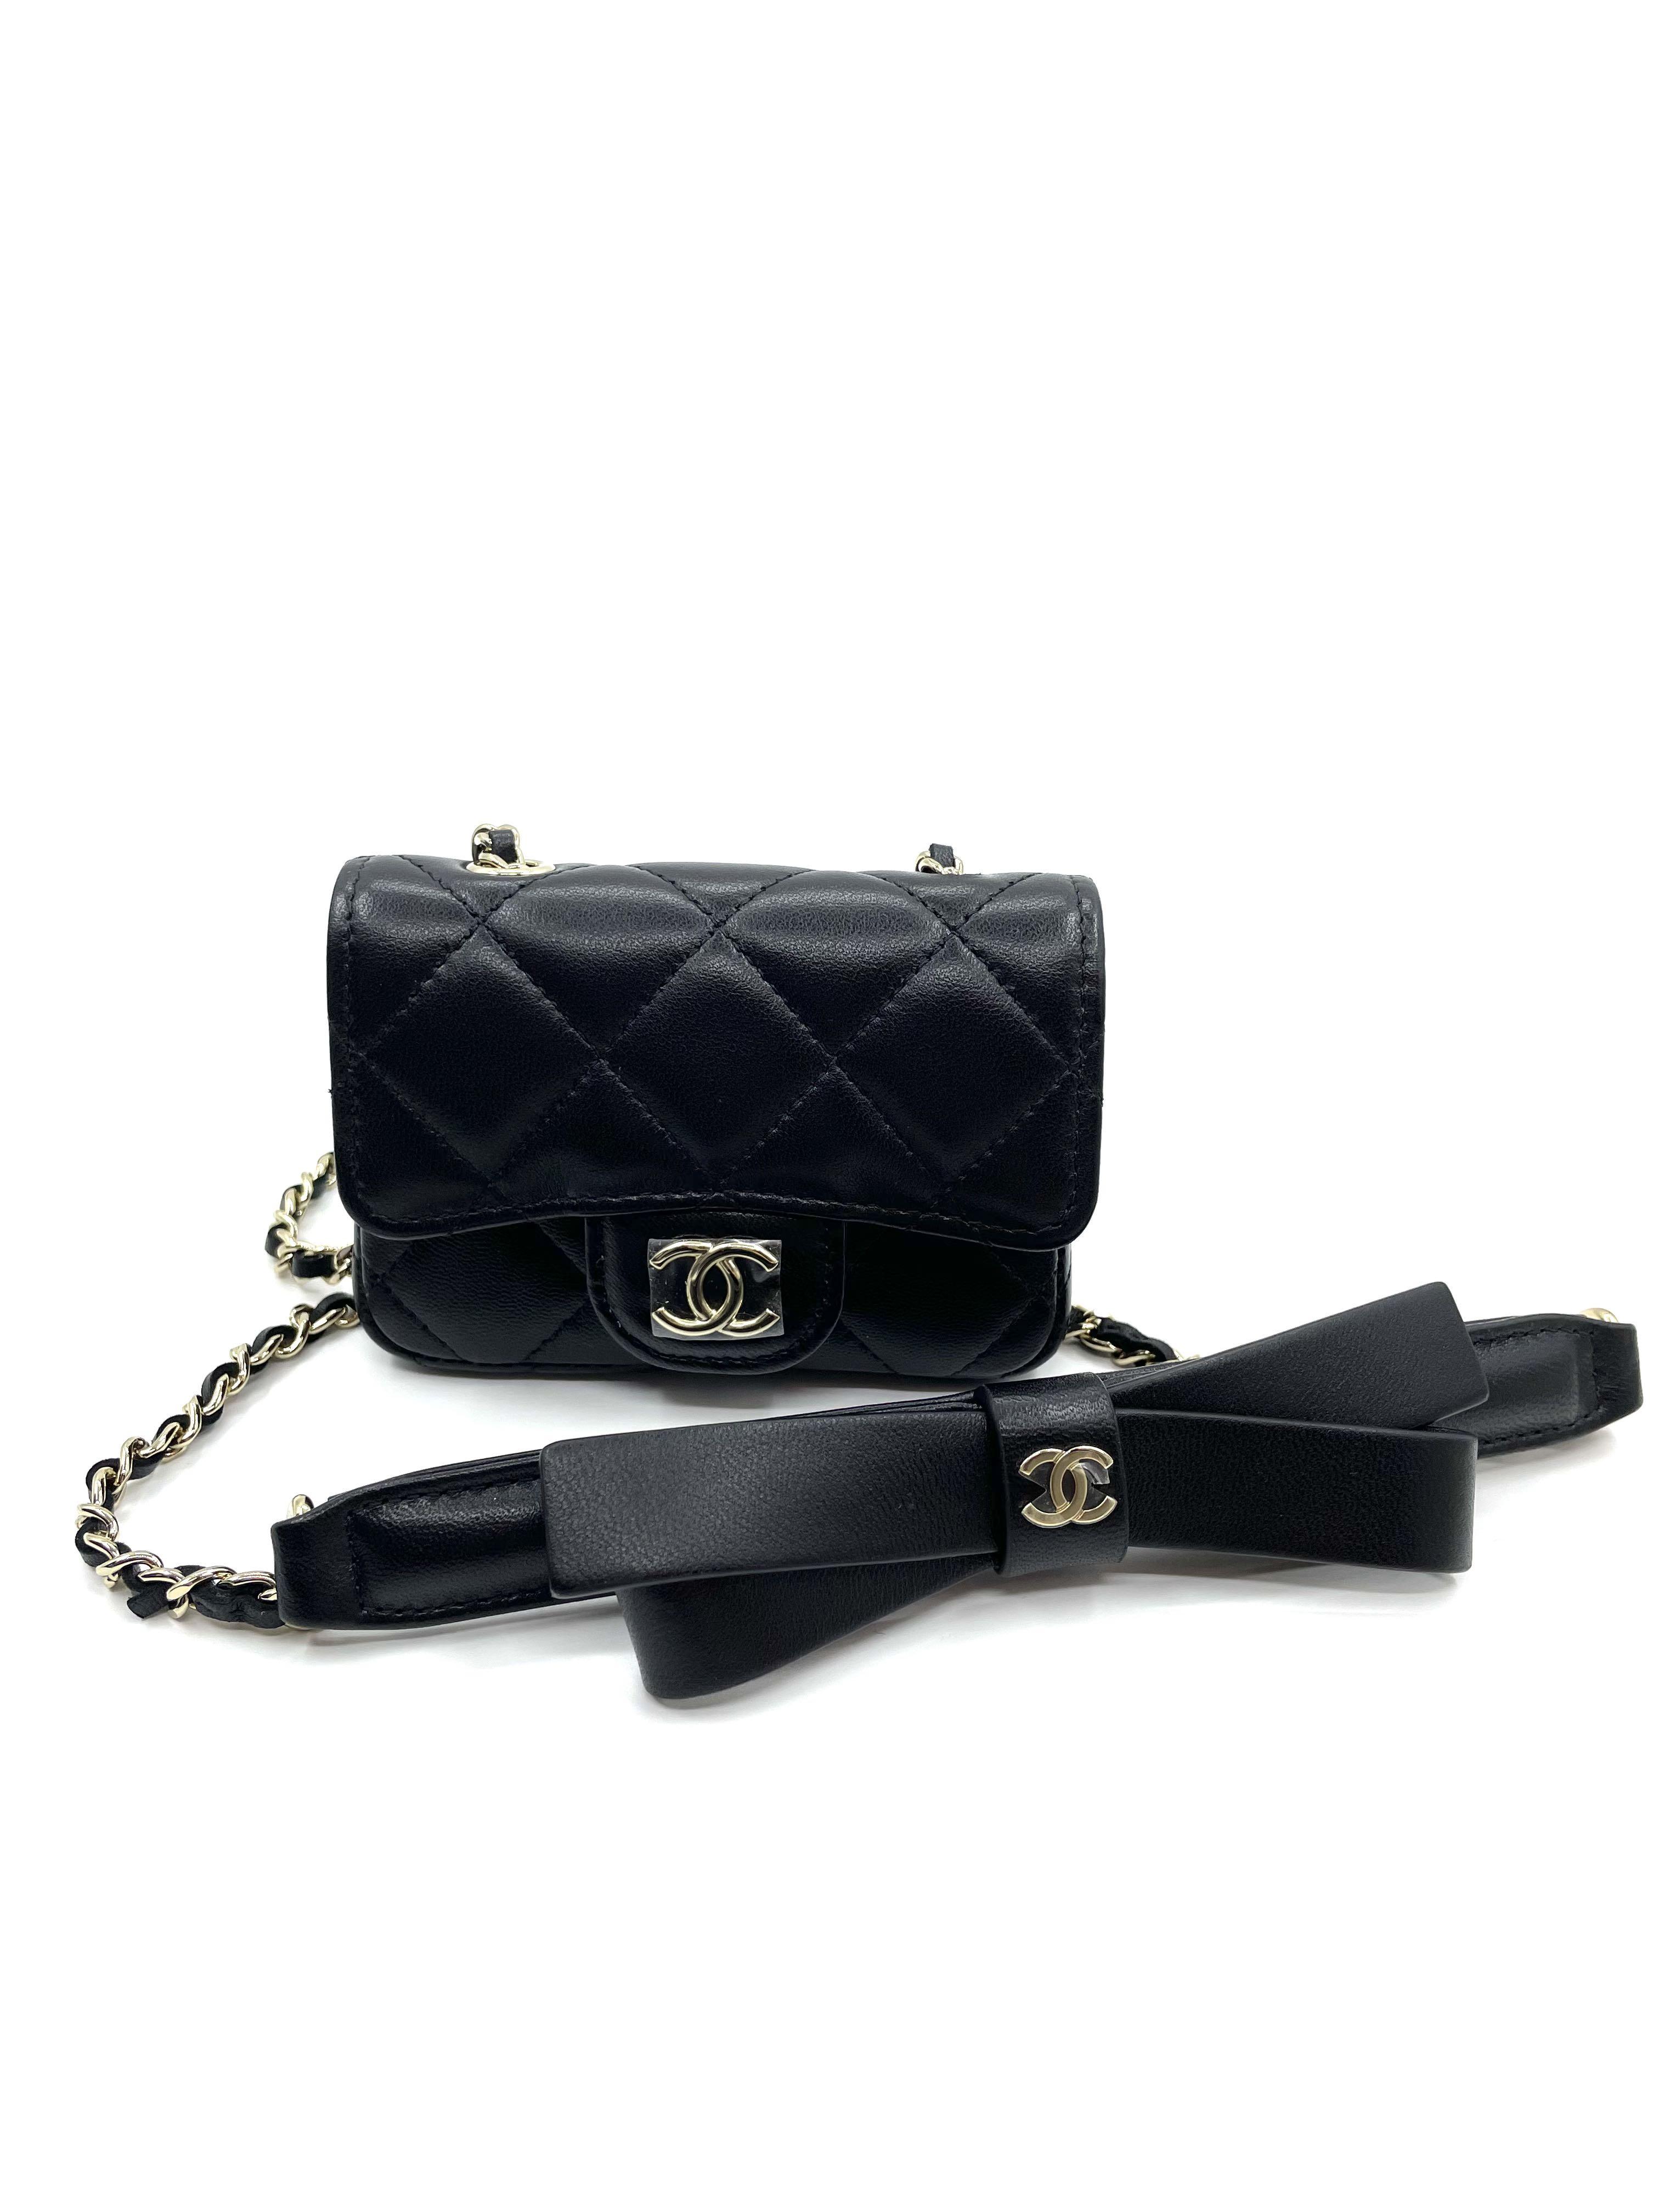 MY FIRST CHANEL BAG!, CHANEL CLASSIC BELT BAG, BAG REVIEW + UNBOXING